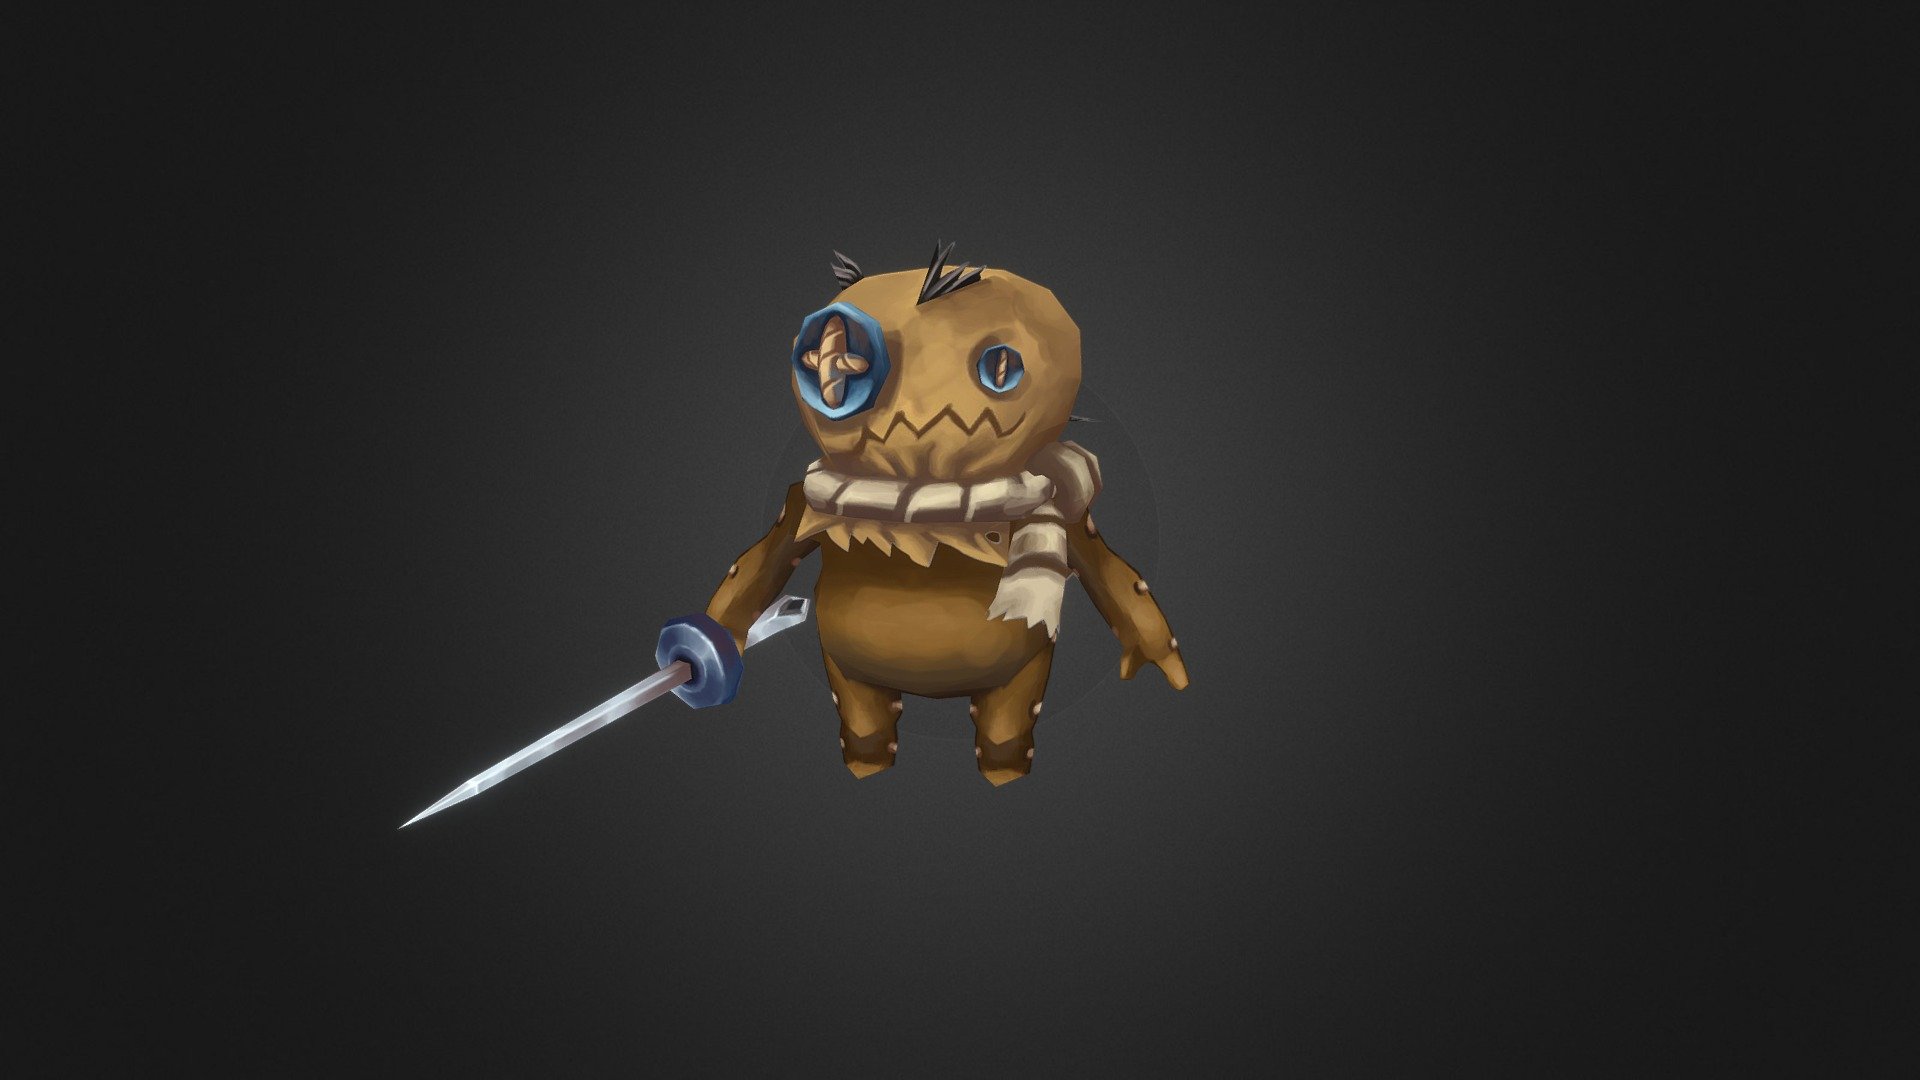 Low poly character - Voodoo Character - 3D model by Offy (@axe163) 3d model